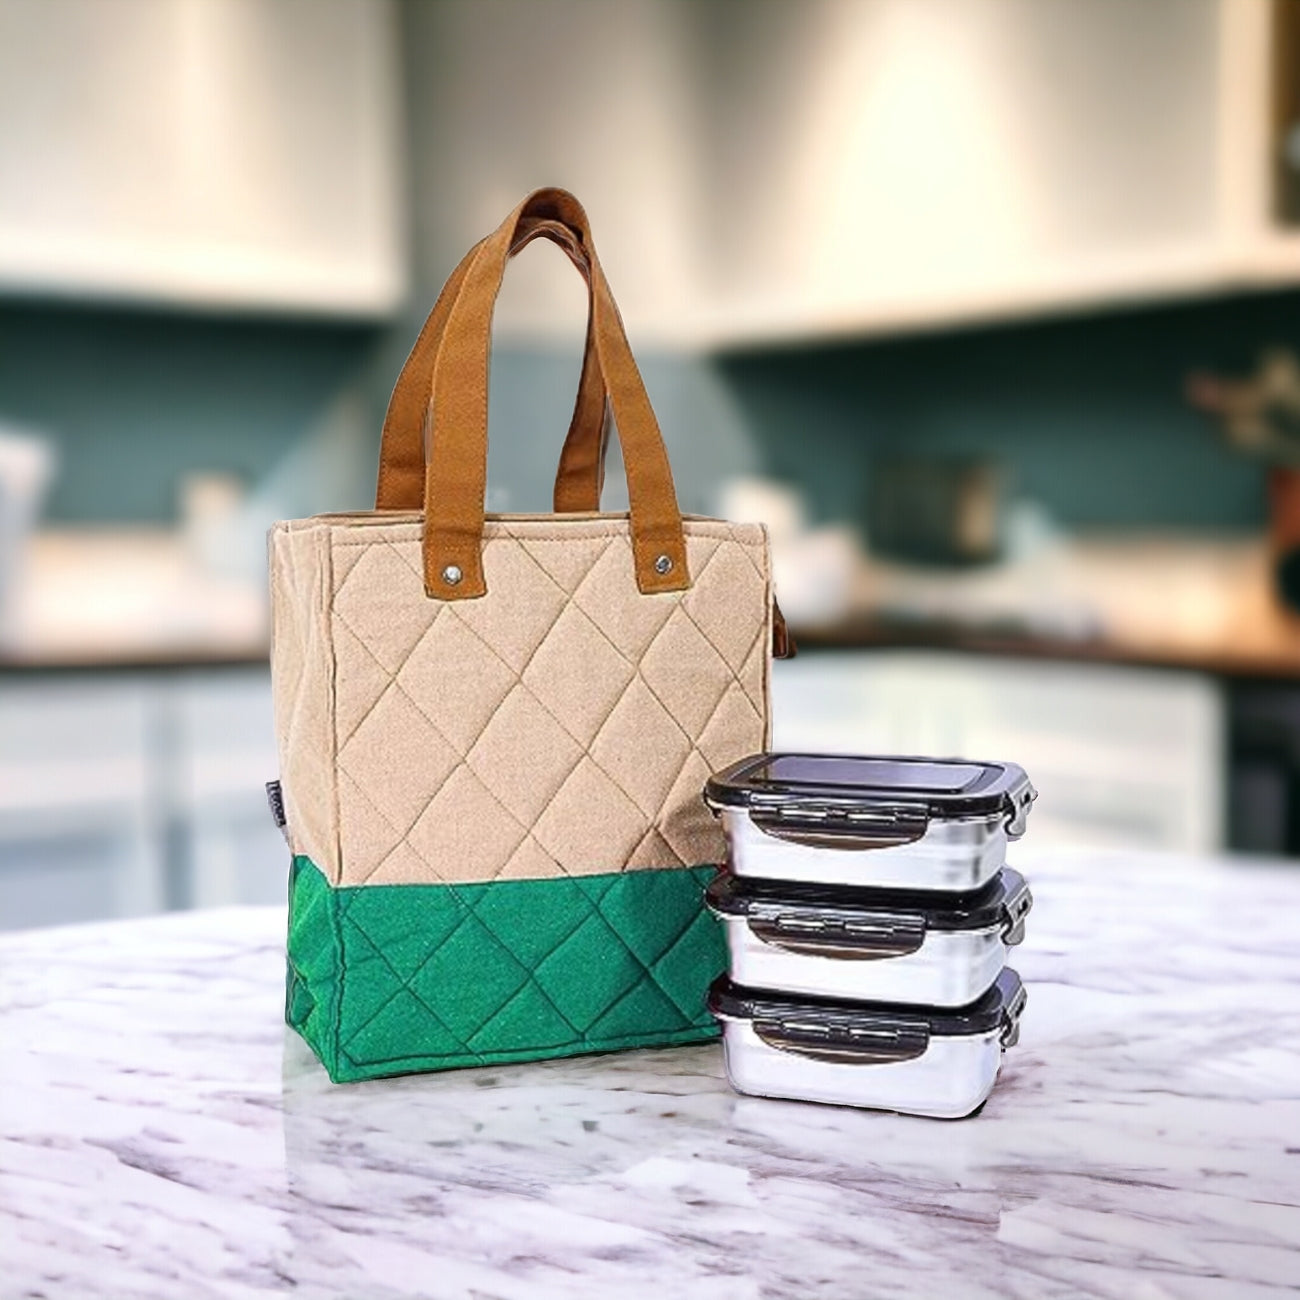 Stainless Steel Lunch Box Green Canvas Bag Femora, 350 ML, 3 Pcs